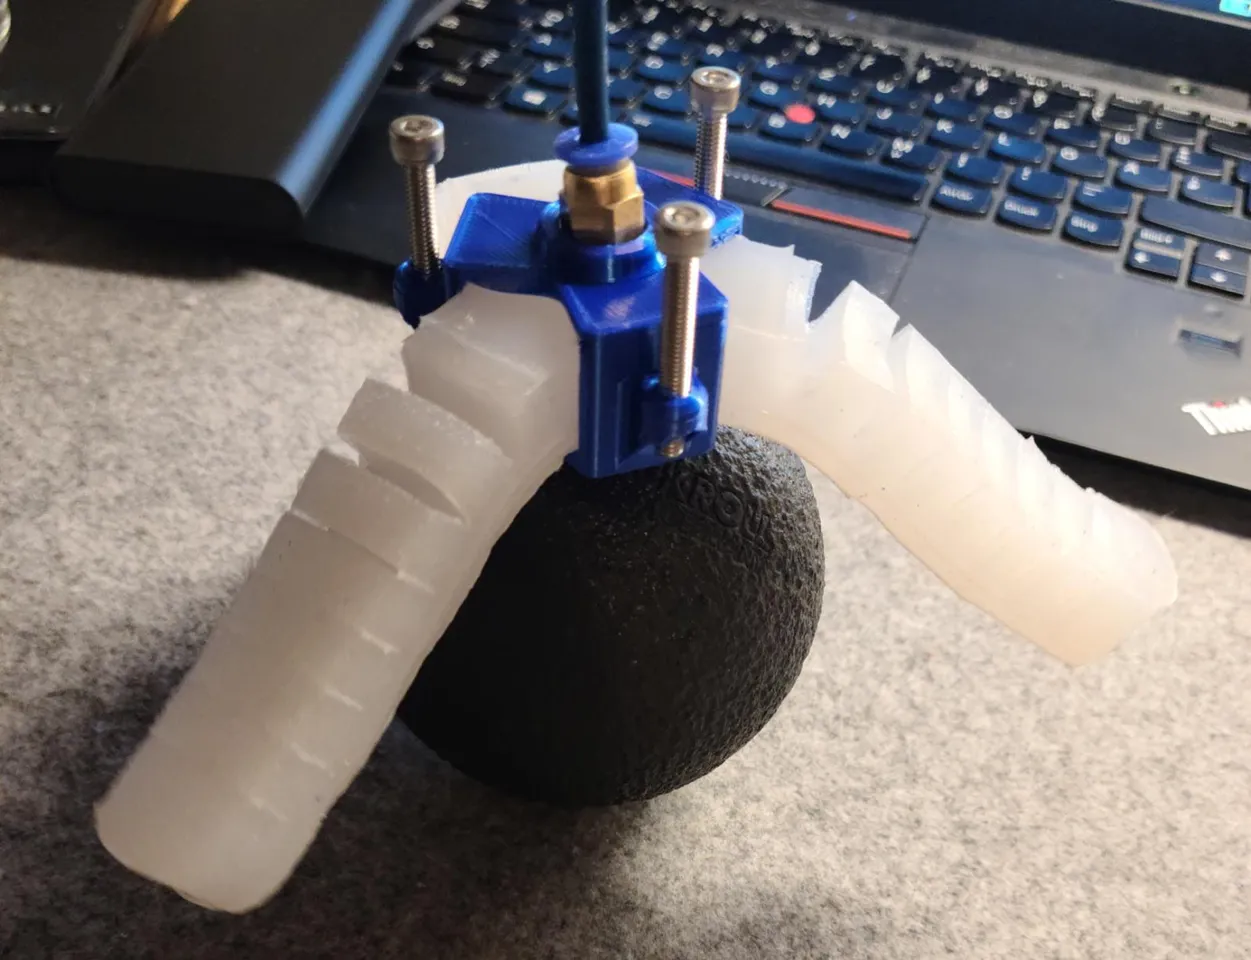 Soft robotic gripper uses nothing but air to grasp and release objects